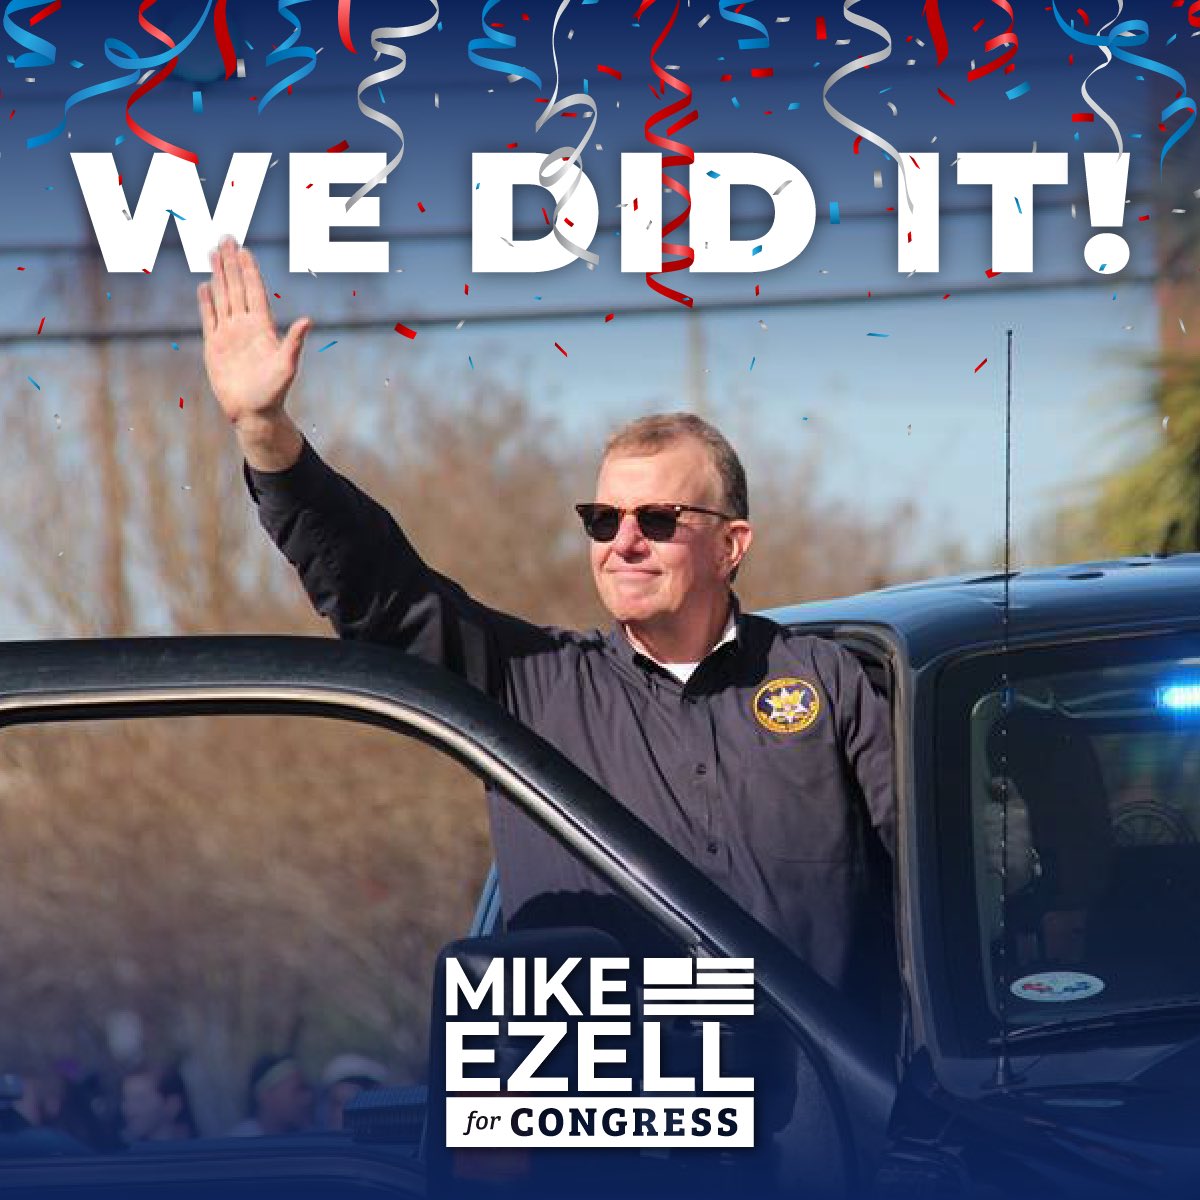 Thank You Mississippi! Republicans all across #MS04 spoke loud and clear tonight that it’s time for new leadership to represent us. I’m honored to be your Republican Nominee for Congress!